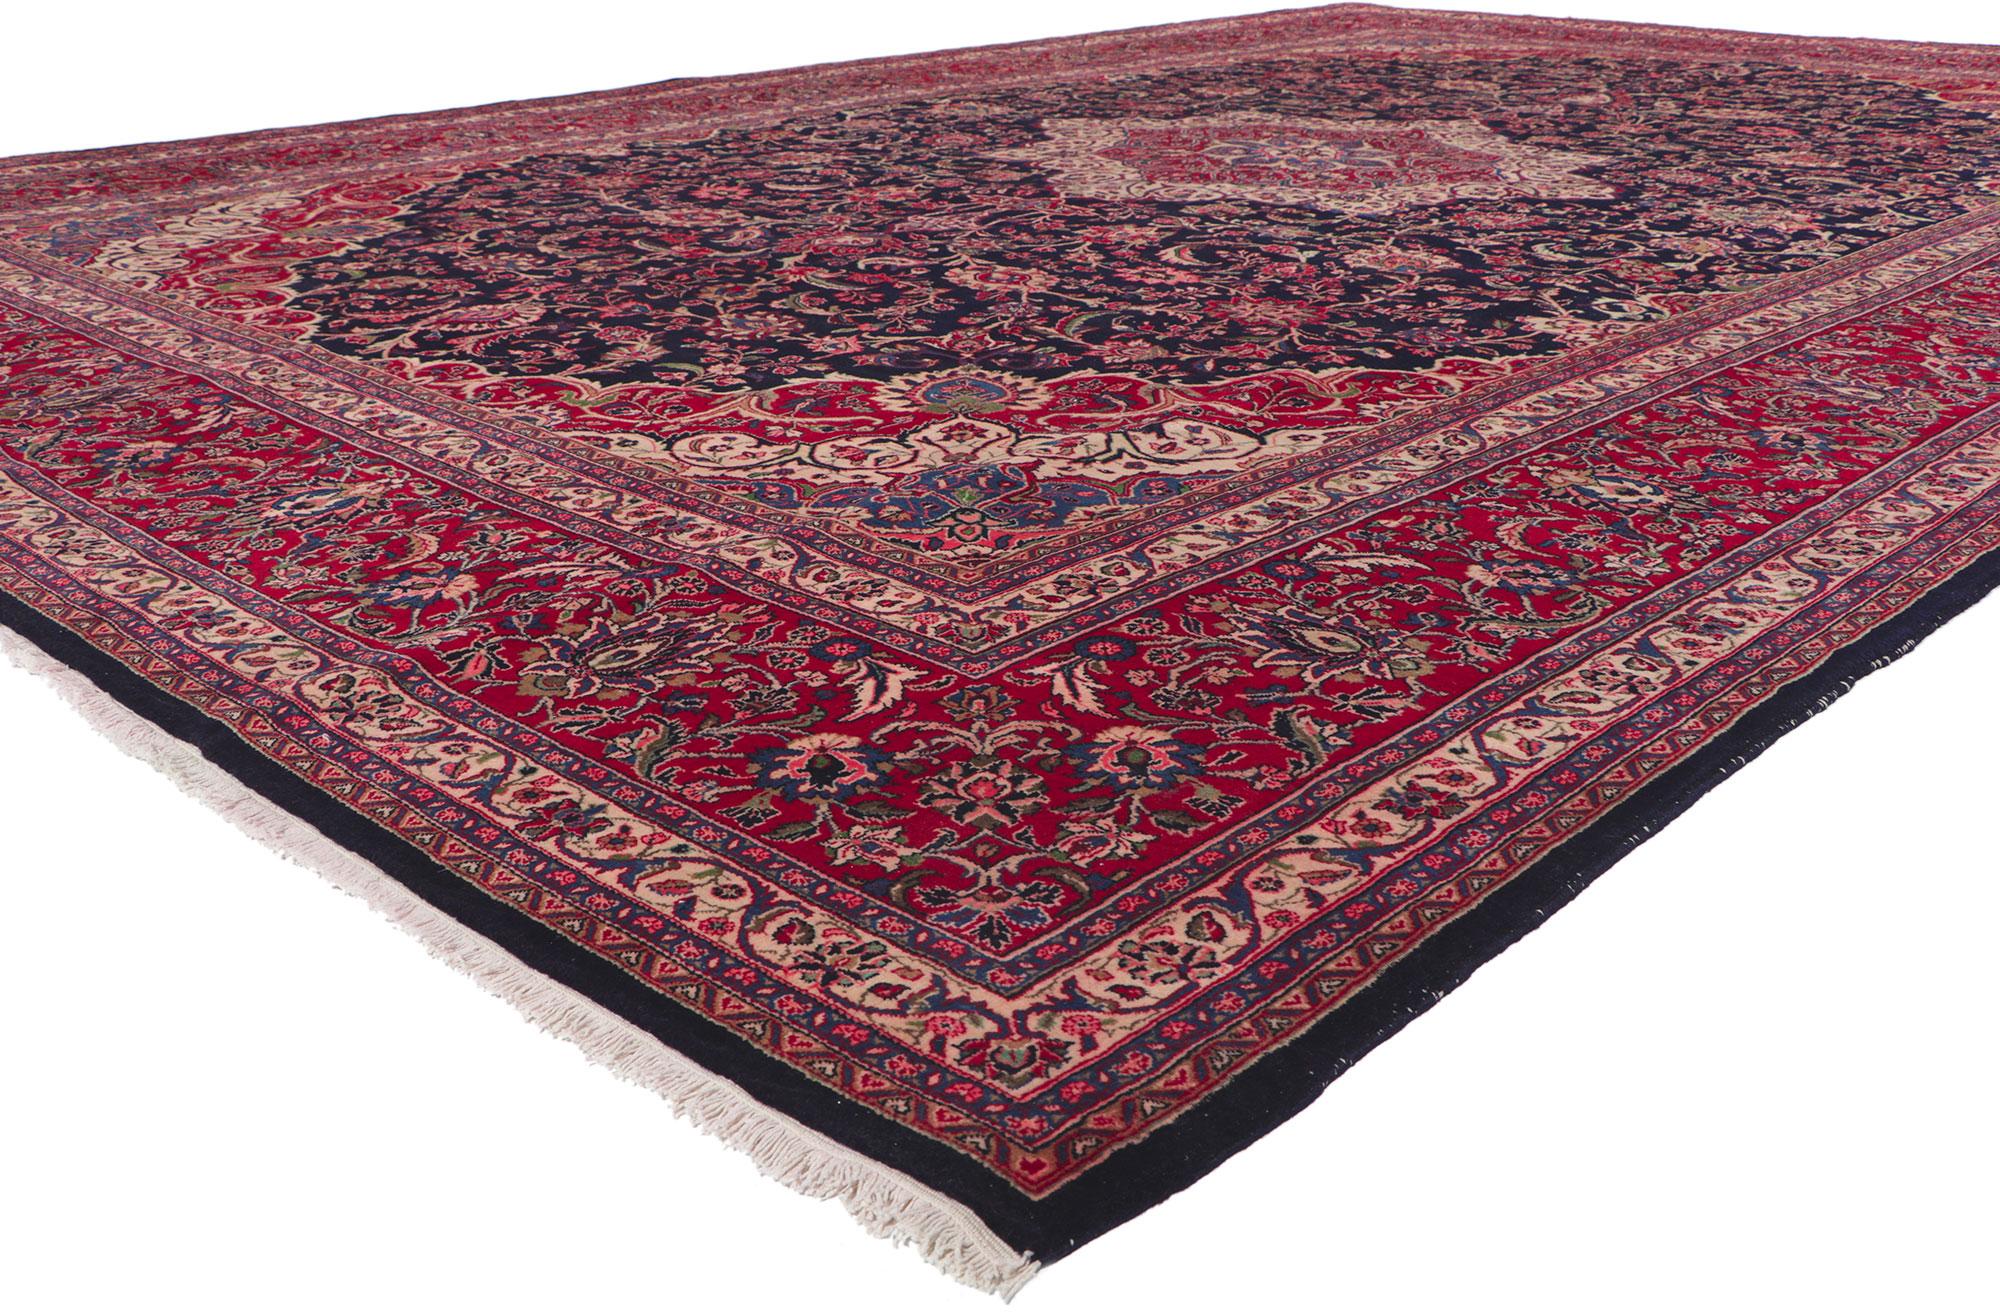 61204 Vintage Persian Mashhad Rug, 11.02 x 16.05.
With timeless appeal and ornate decorative detailing, this hand knotted wool vintage Persian Mashhad rug is a captivating vision of woven beauty. The midnight colored field highlights an eight-point